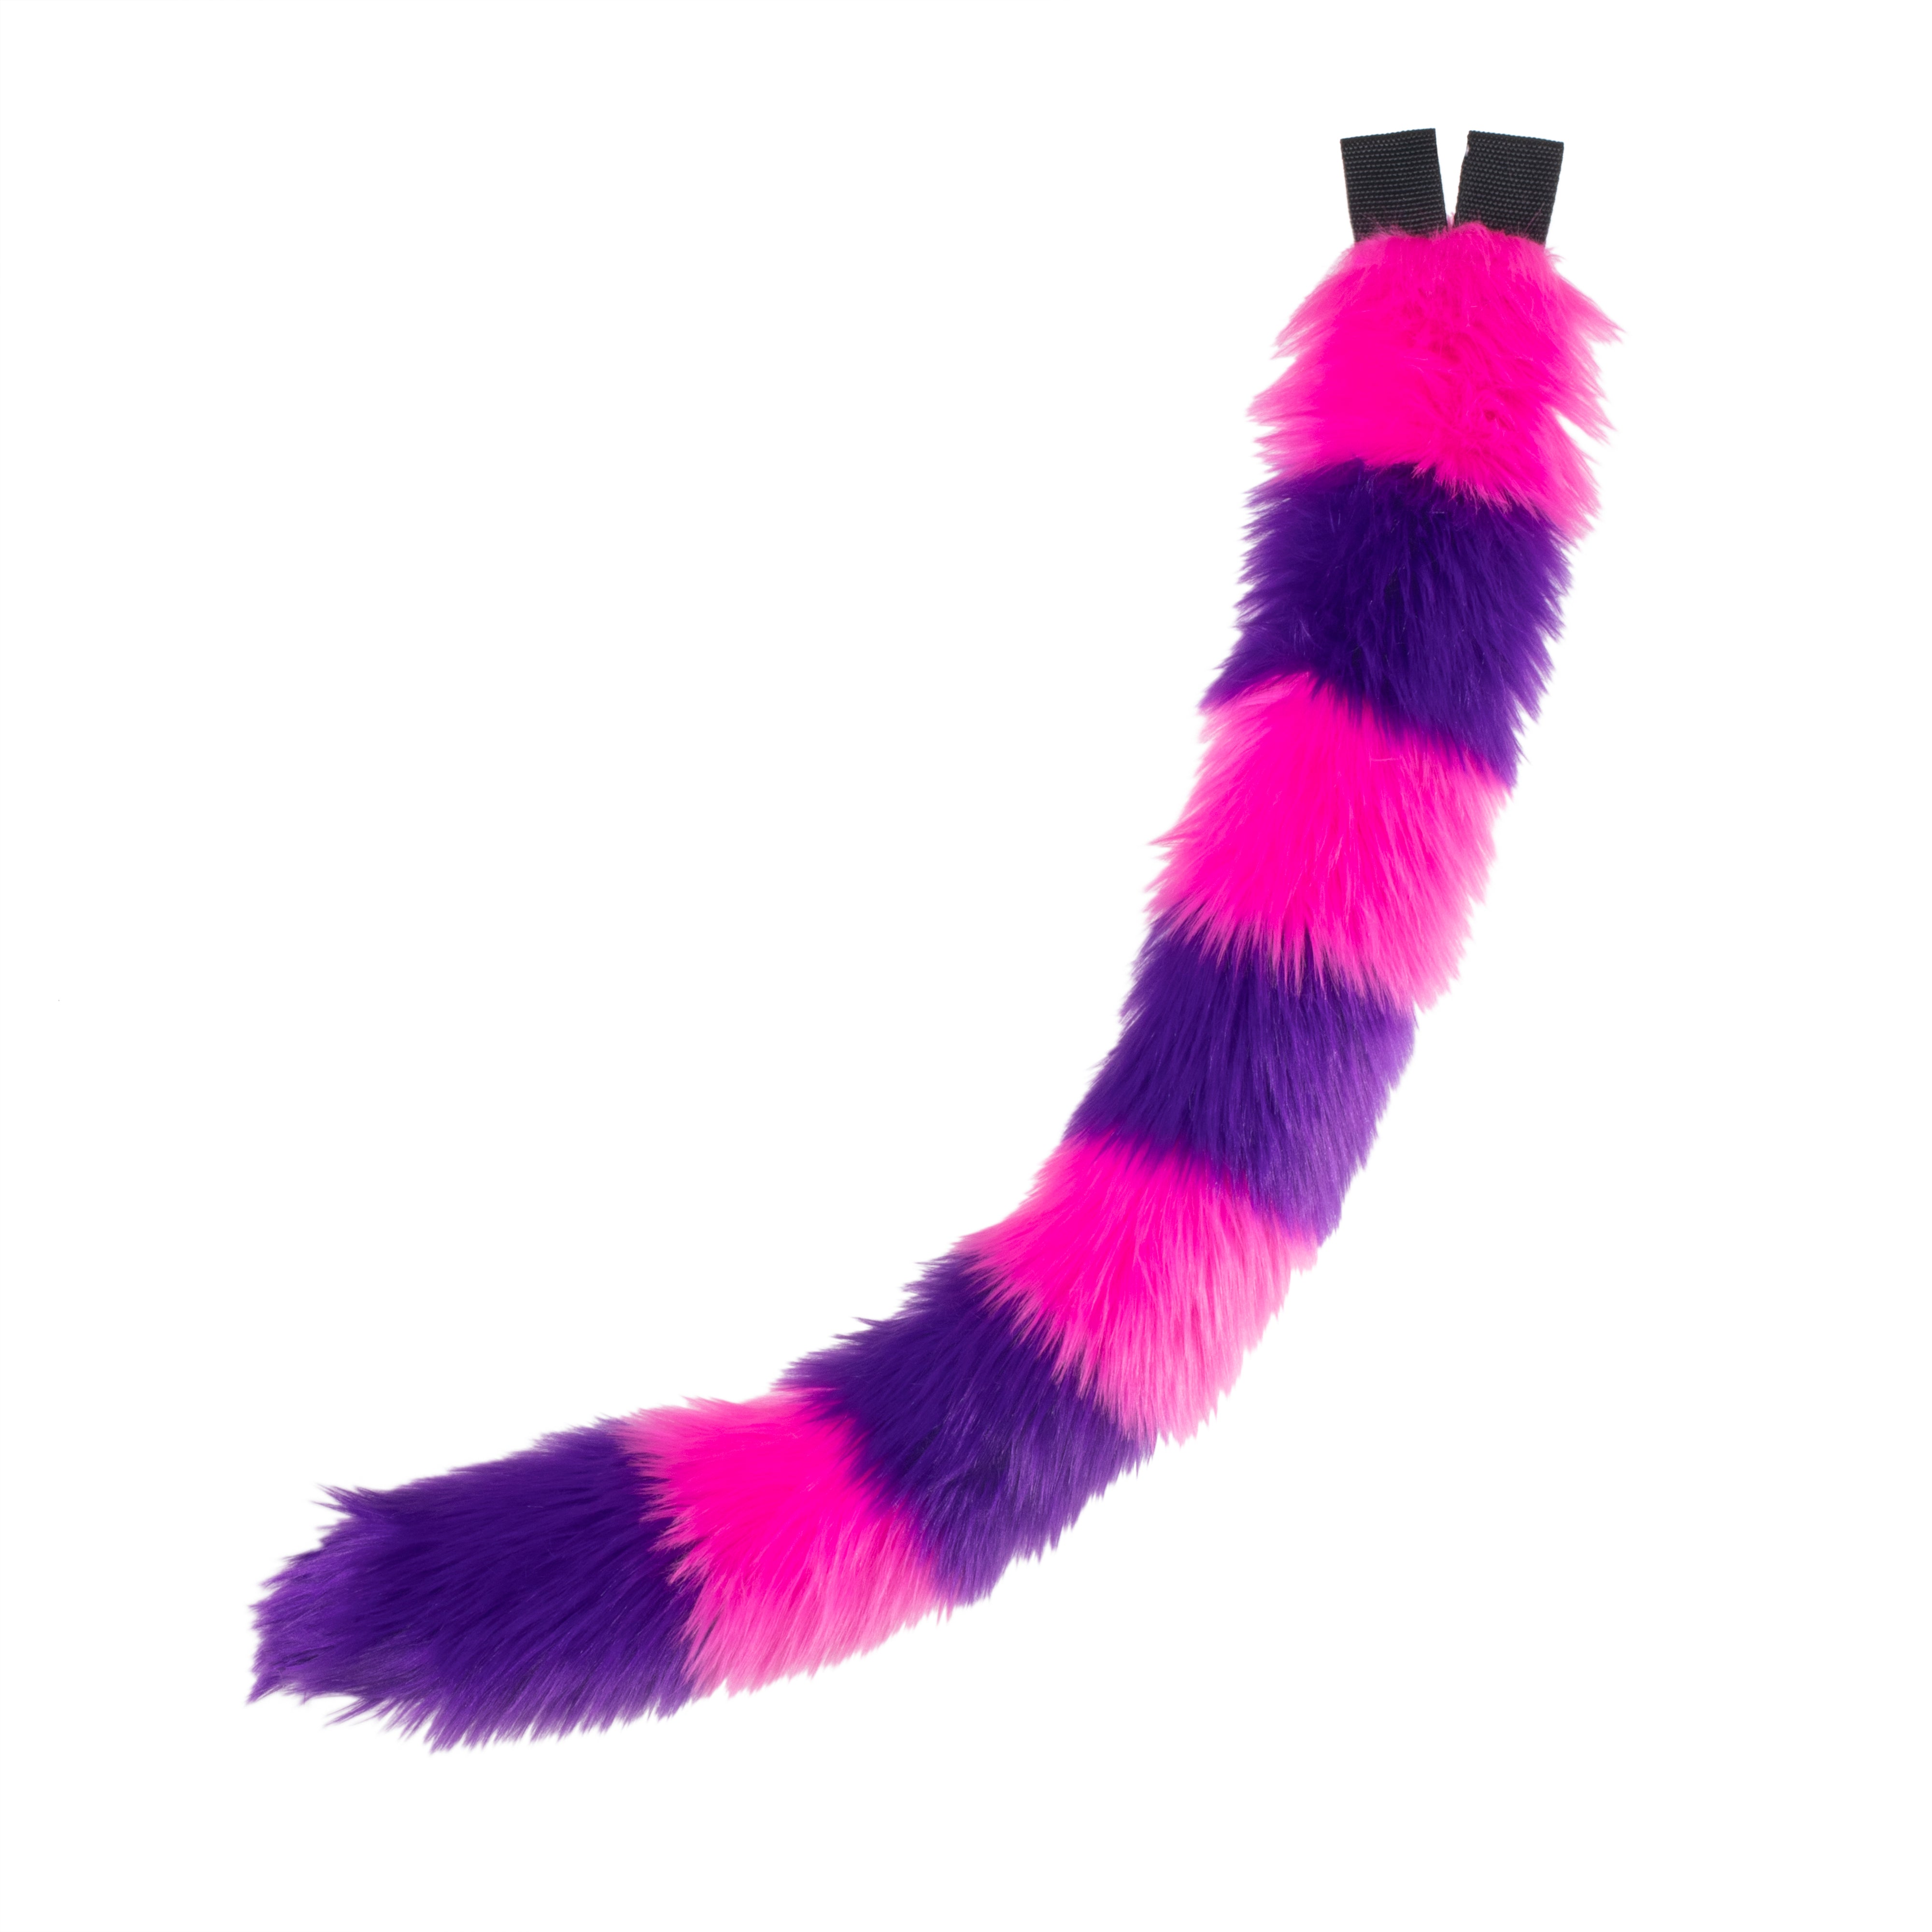 Pawstar Cheshire Striped Kitty Tail alice in wonderland furry fluffy partial fursuit halloween costume or cosplay accessory